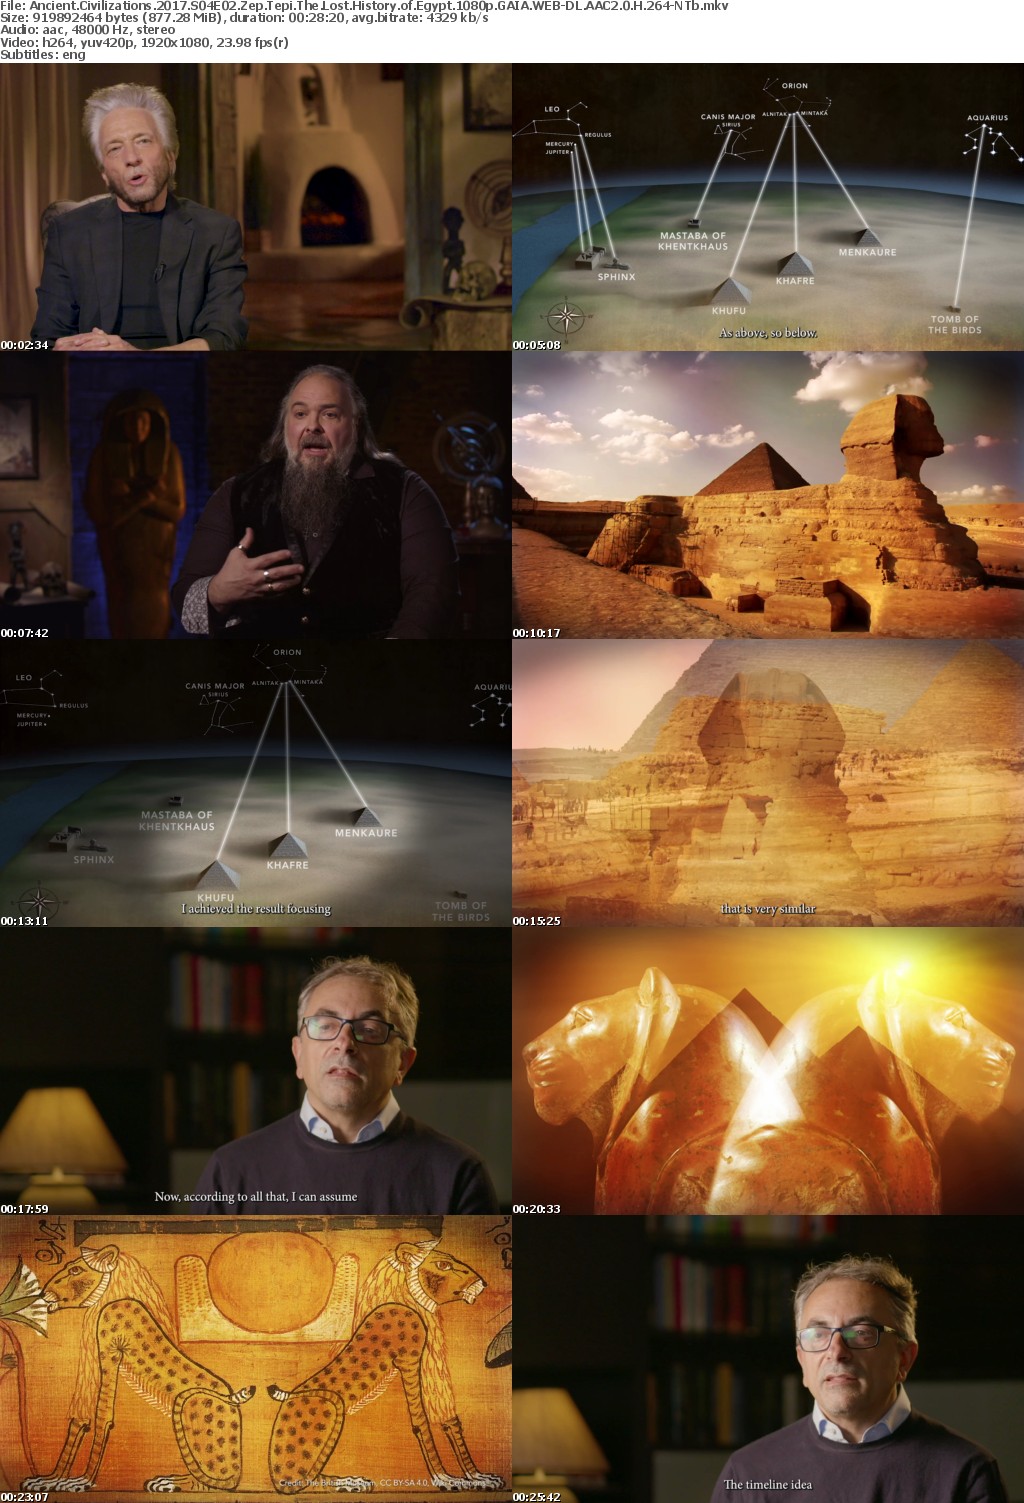 Ancient Civilizations 2017 S04E02 Zep Tepi The Lost History of Egypt 1080p GAIA WEB-DL AAC2 0 H 264-NTb